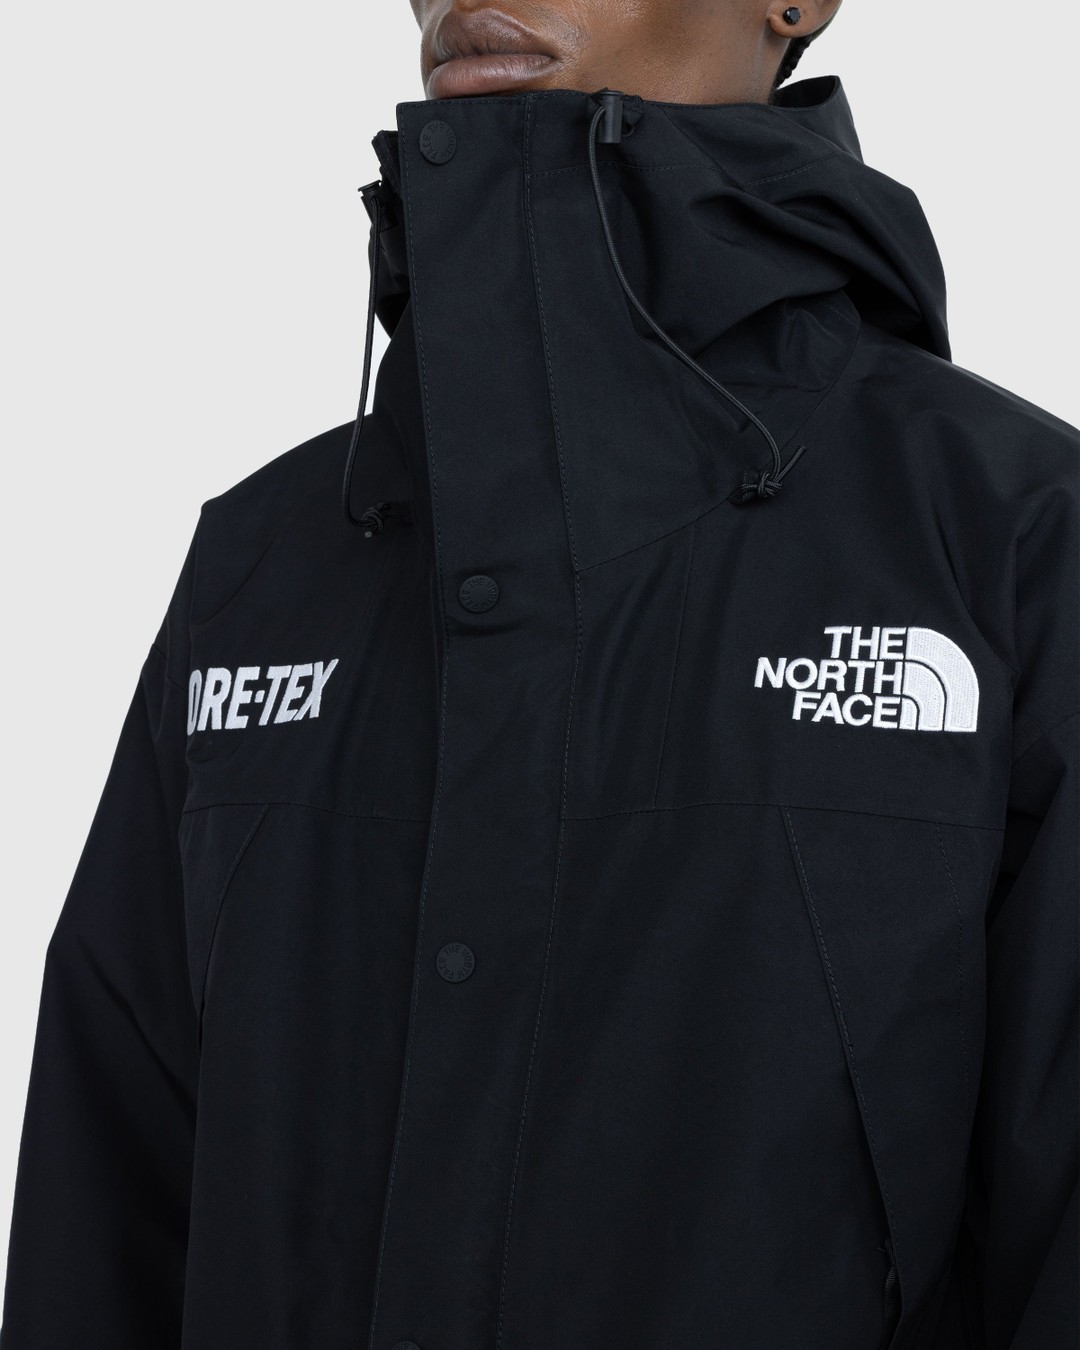 The North Face – GORE-TEX Mountain Jacket TNF Black - Outerwear - Black - Image 5